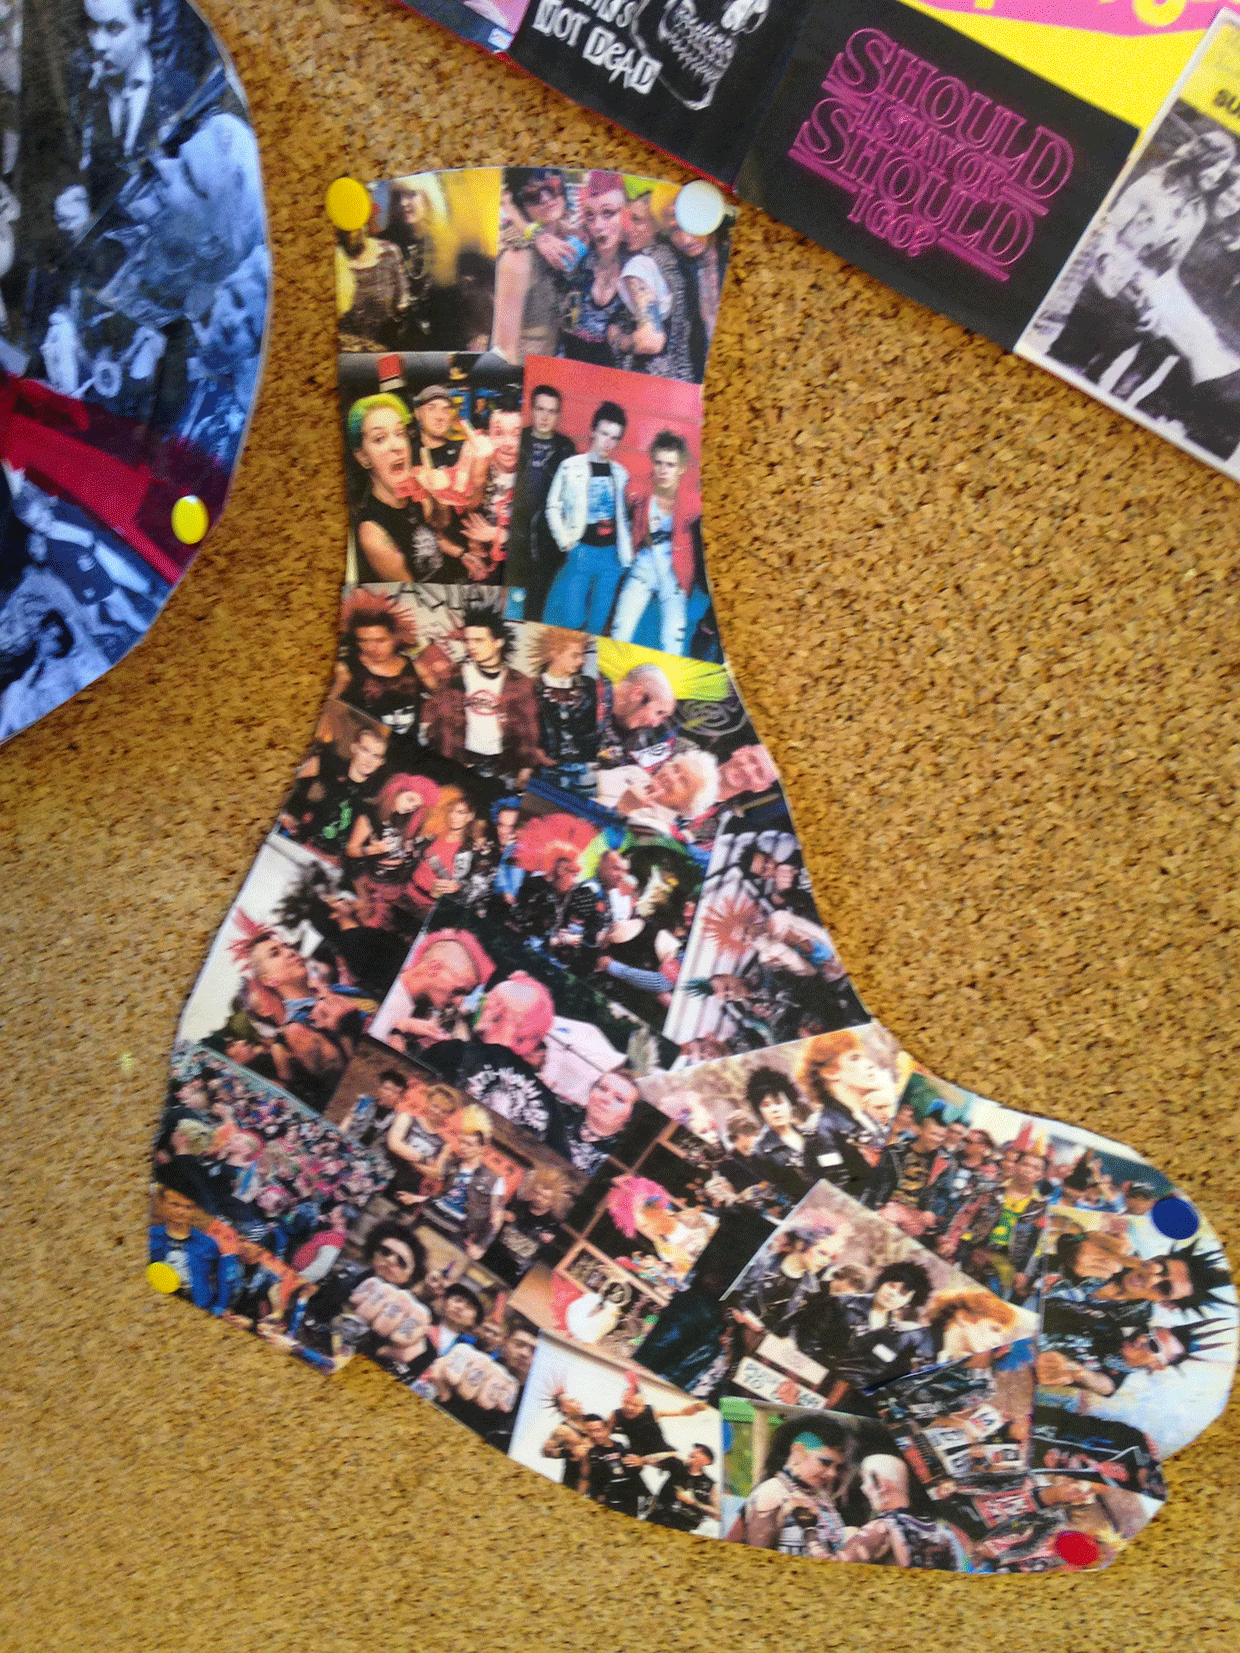 A punk collage in the shape of a boot.